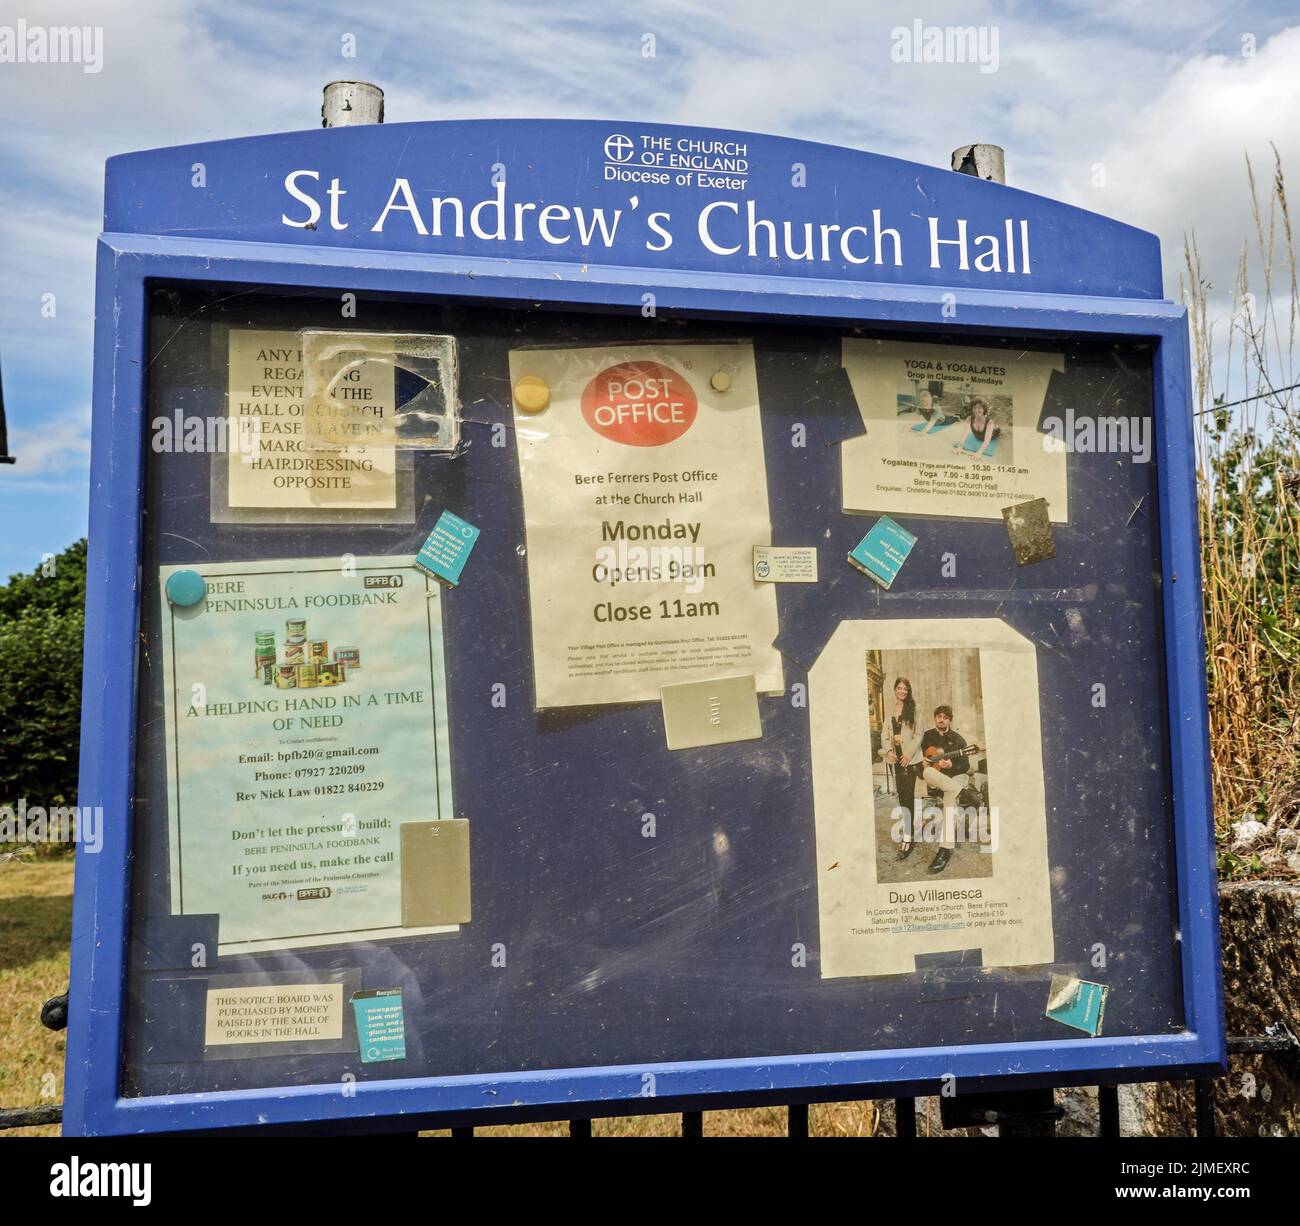 The noticeboard at St Andrew’s Church Hall at the little Devon Village of Bere Ferrers. A weekly post office service, Yoga and Help in a Time of Need Stock Photo